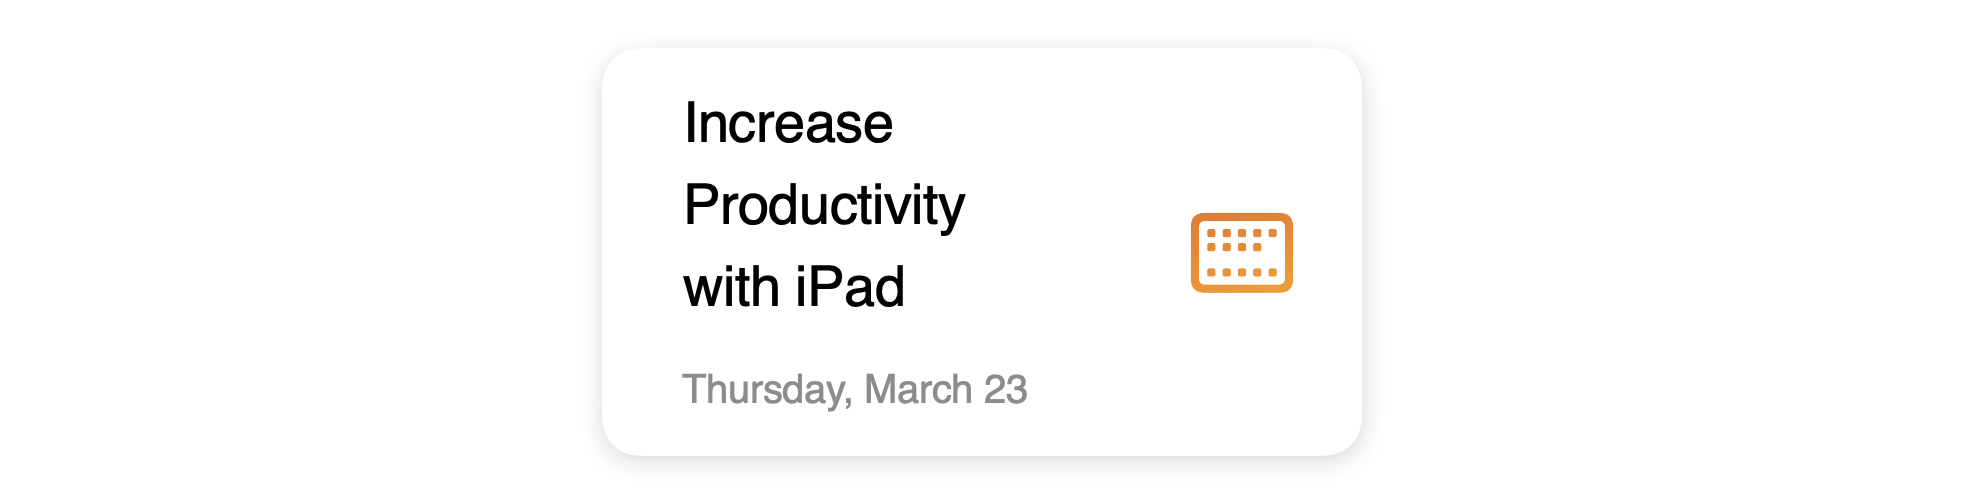 Increase Productivity with iPad session schedule icon.